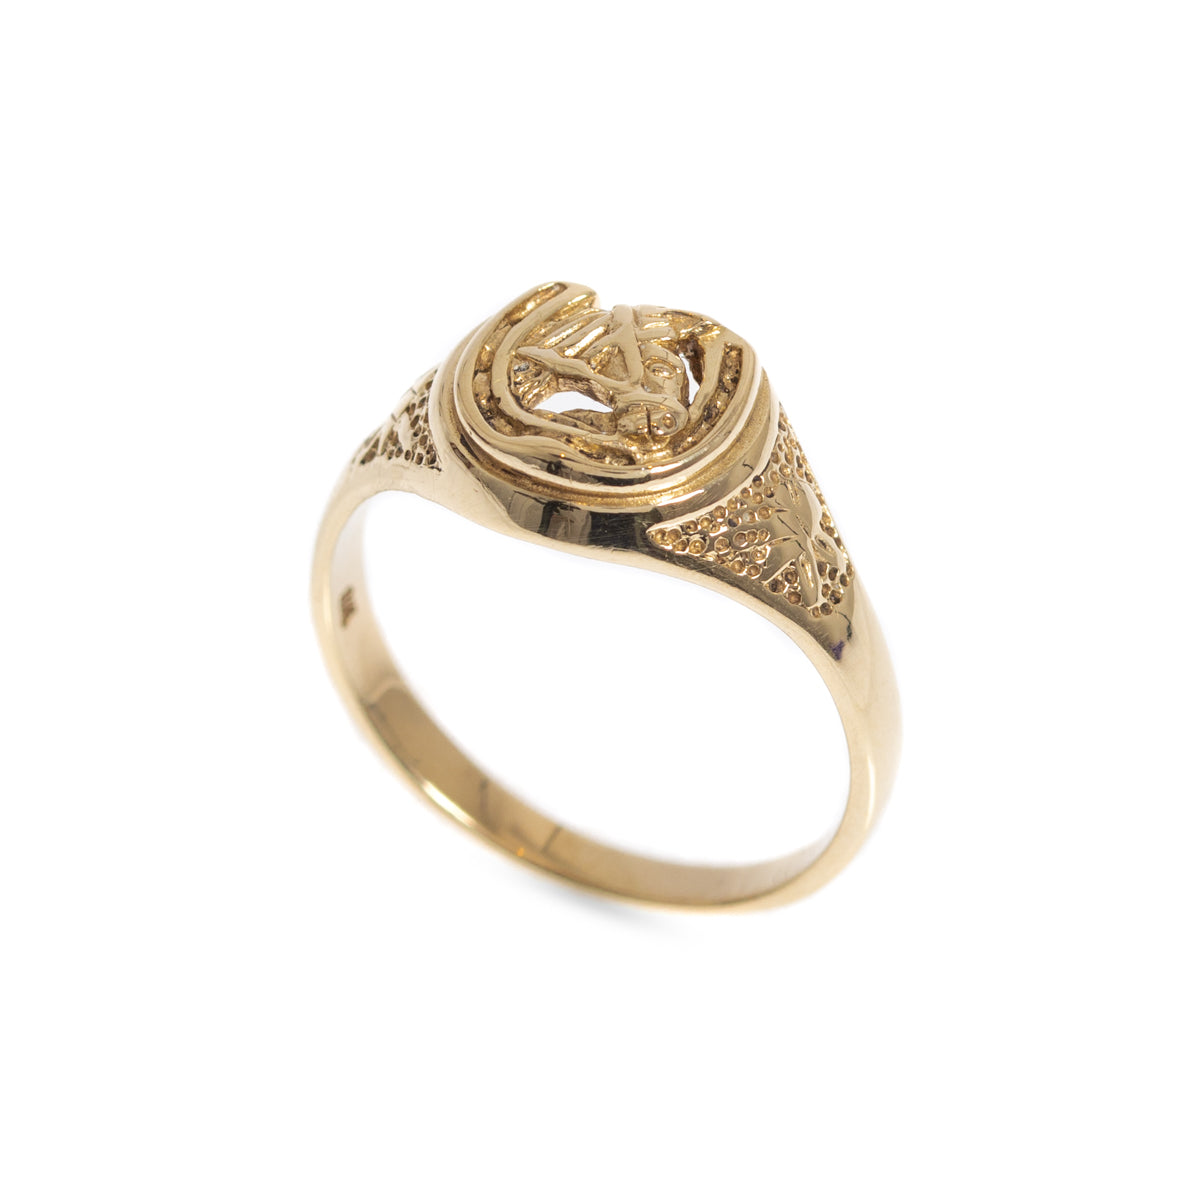 9ct Solid Gold Horses Head In Horseshoe Shaped Ladies Ring UK Size P1/2  (Code A1008)